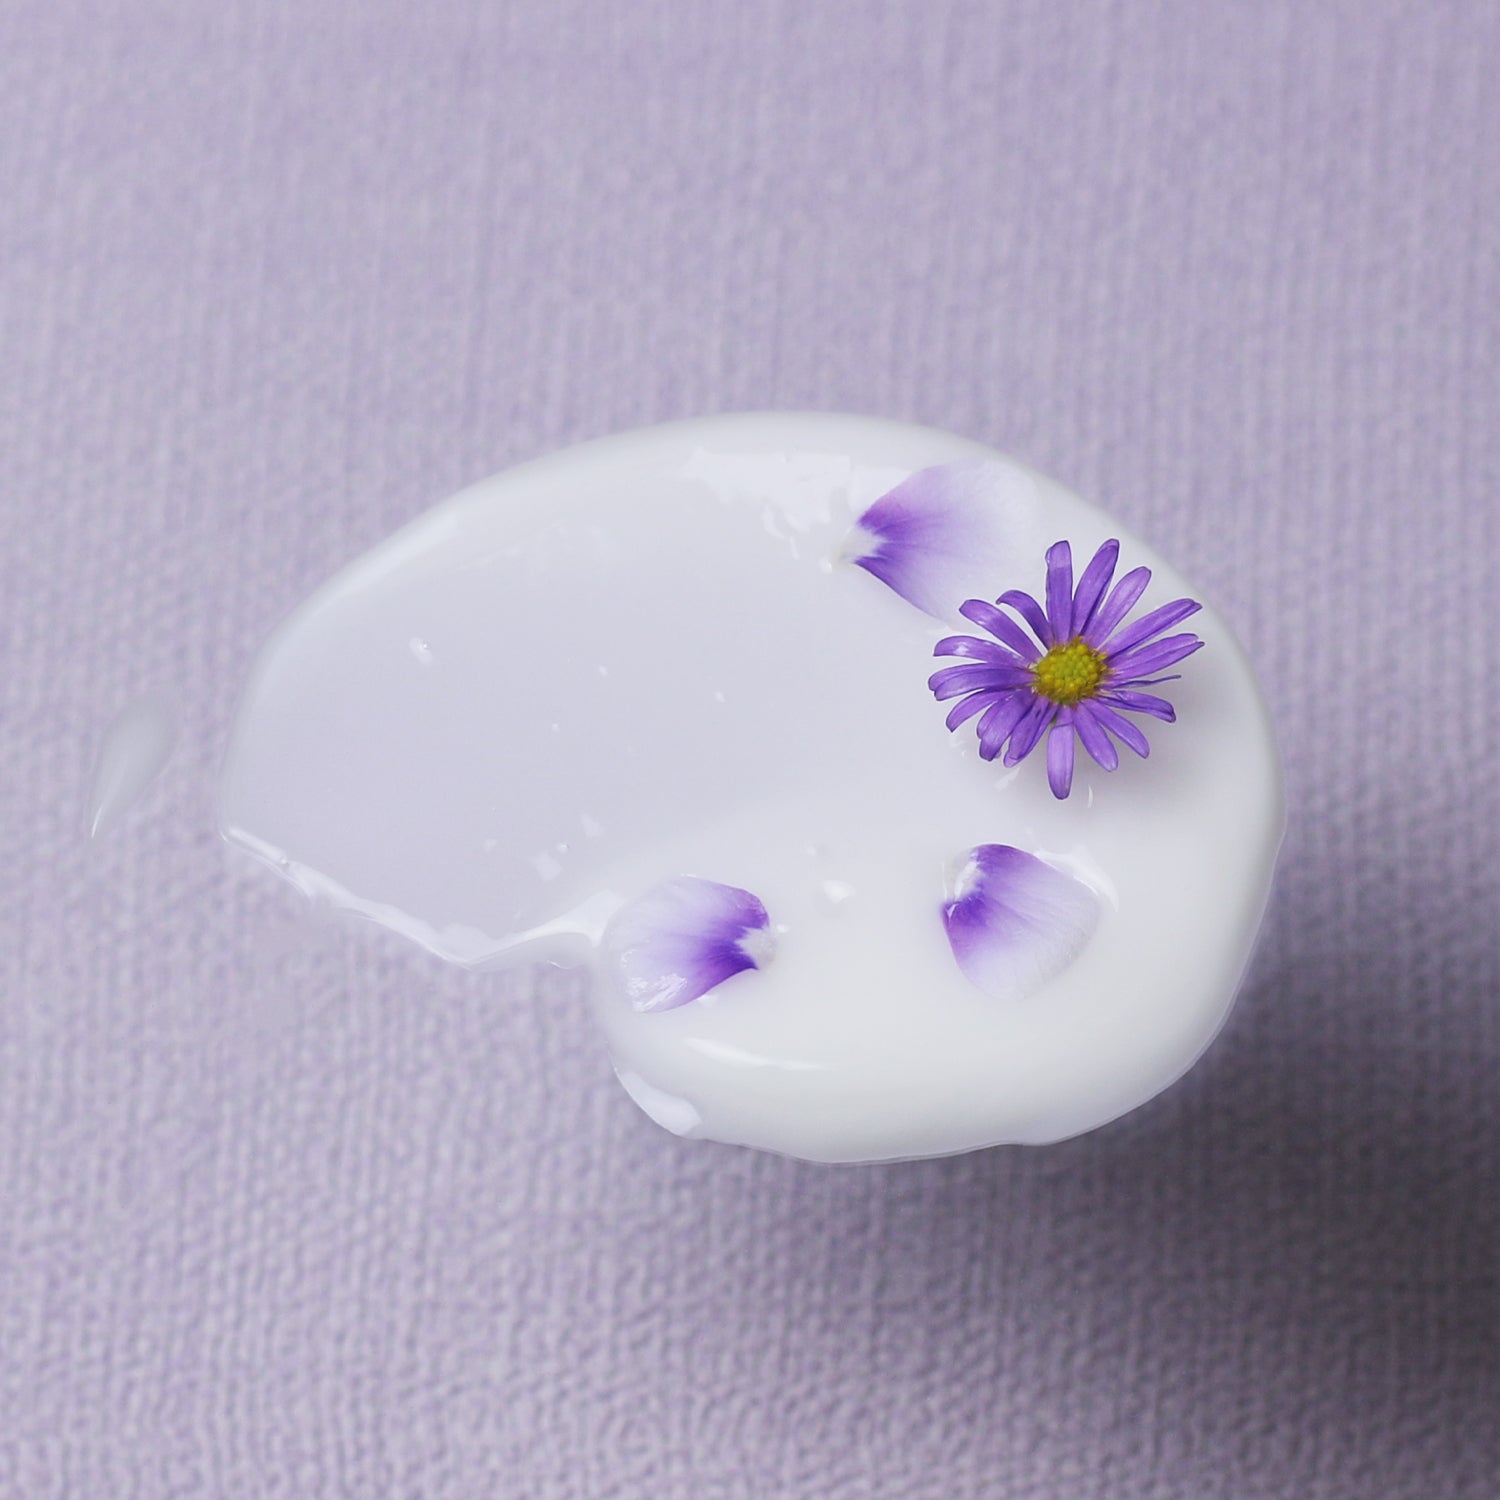 A swatch of Bakuchiol Smoothing Serum  with tiny flowers and petals 